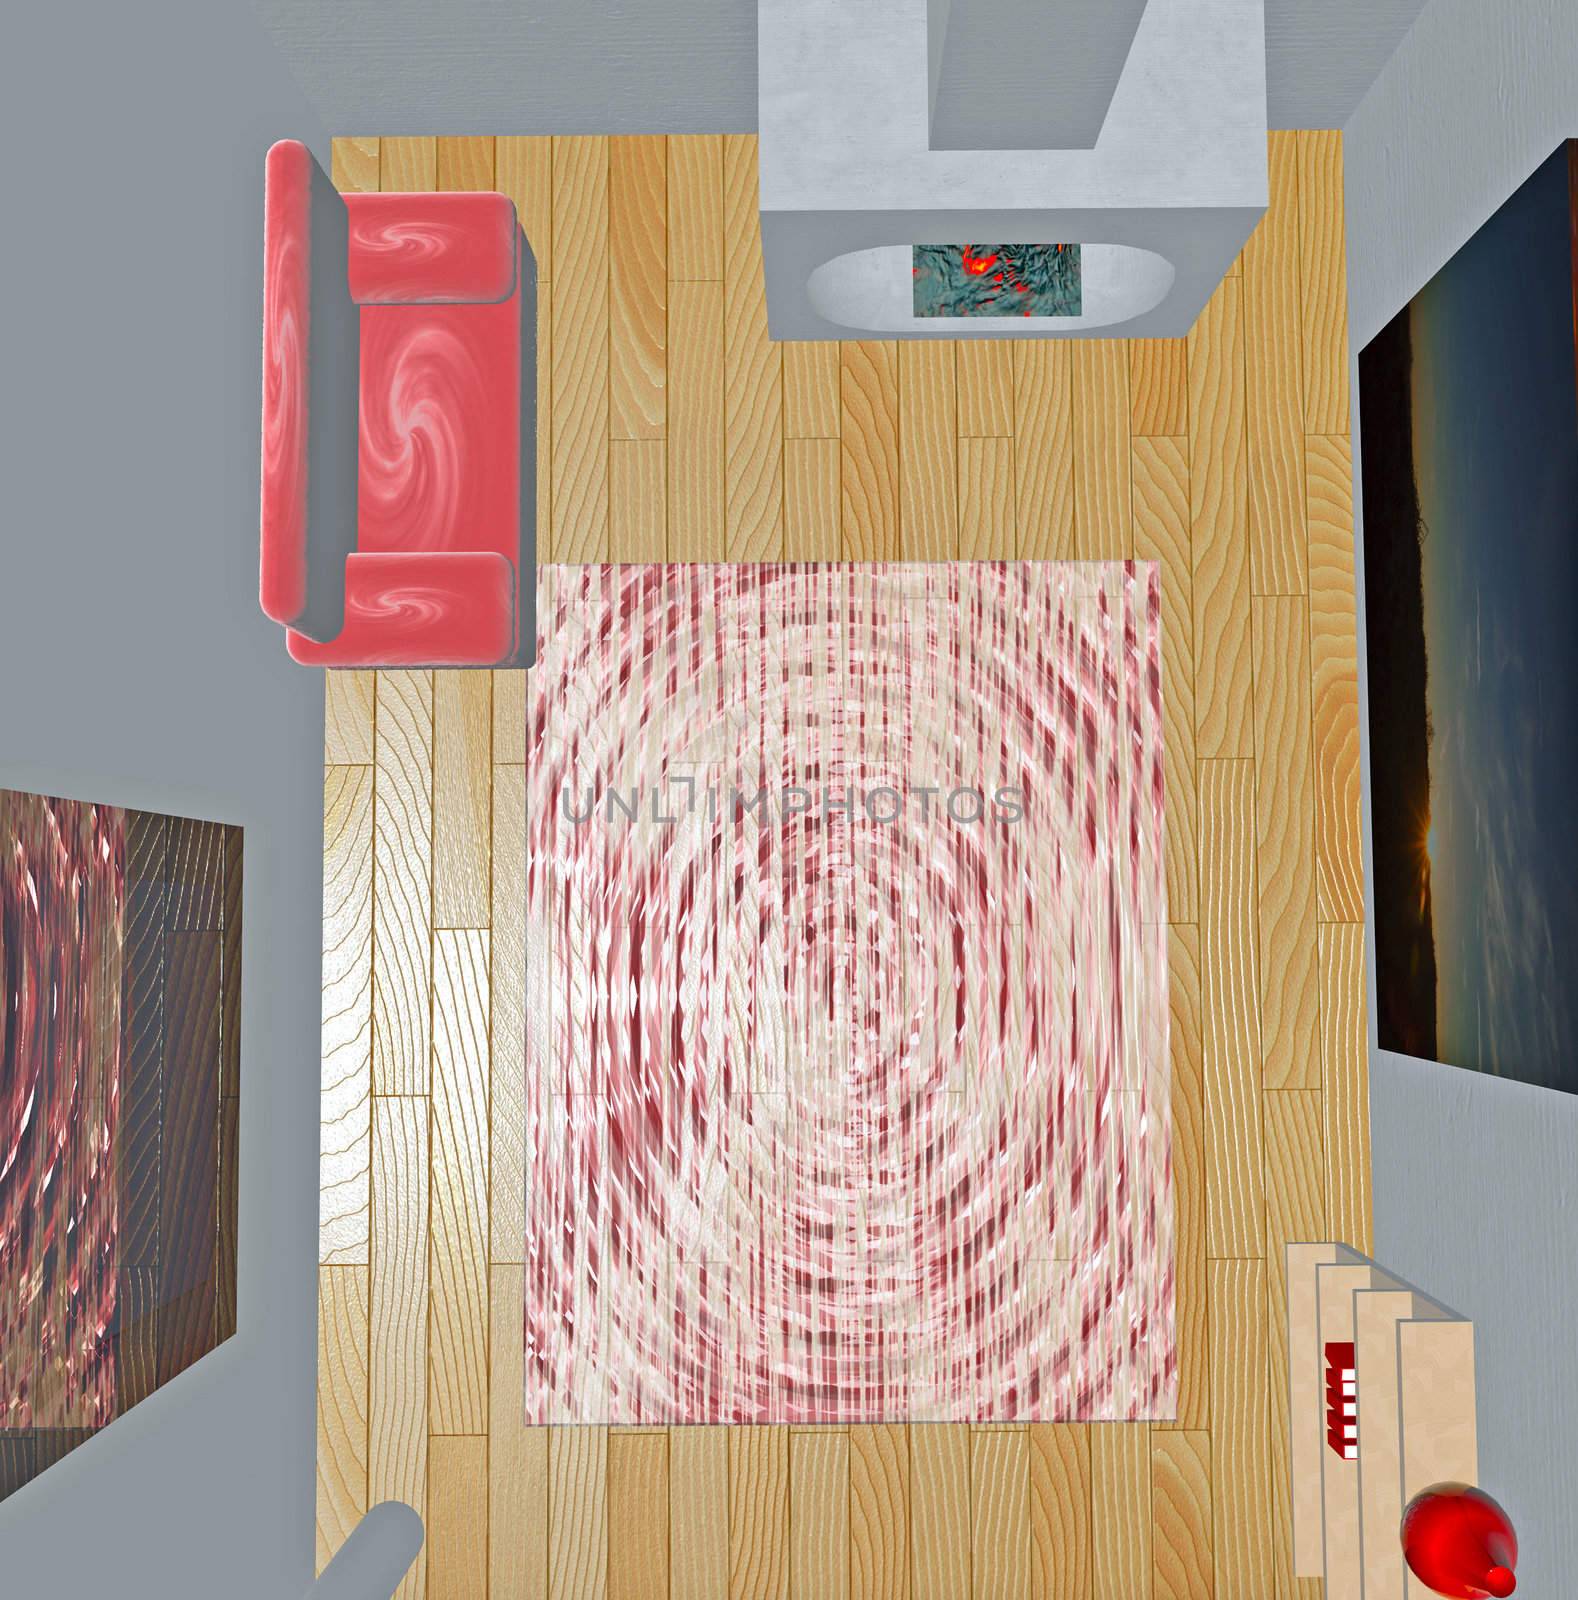 View of  render of a 3D room with lit fireplace, carpet and big photo of a sunset